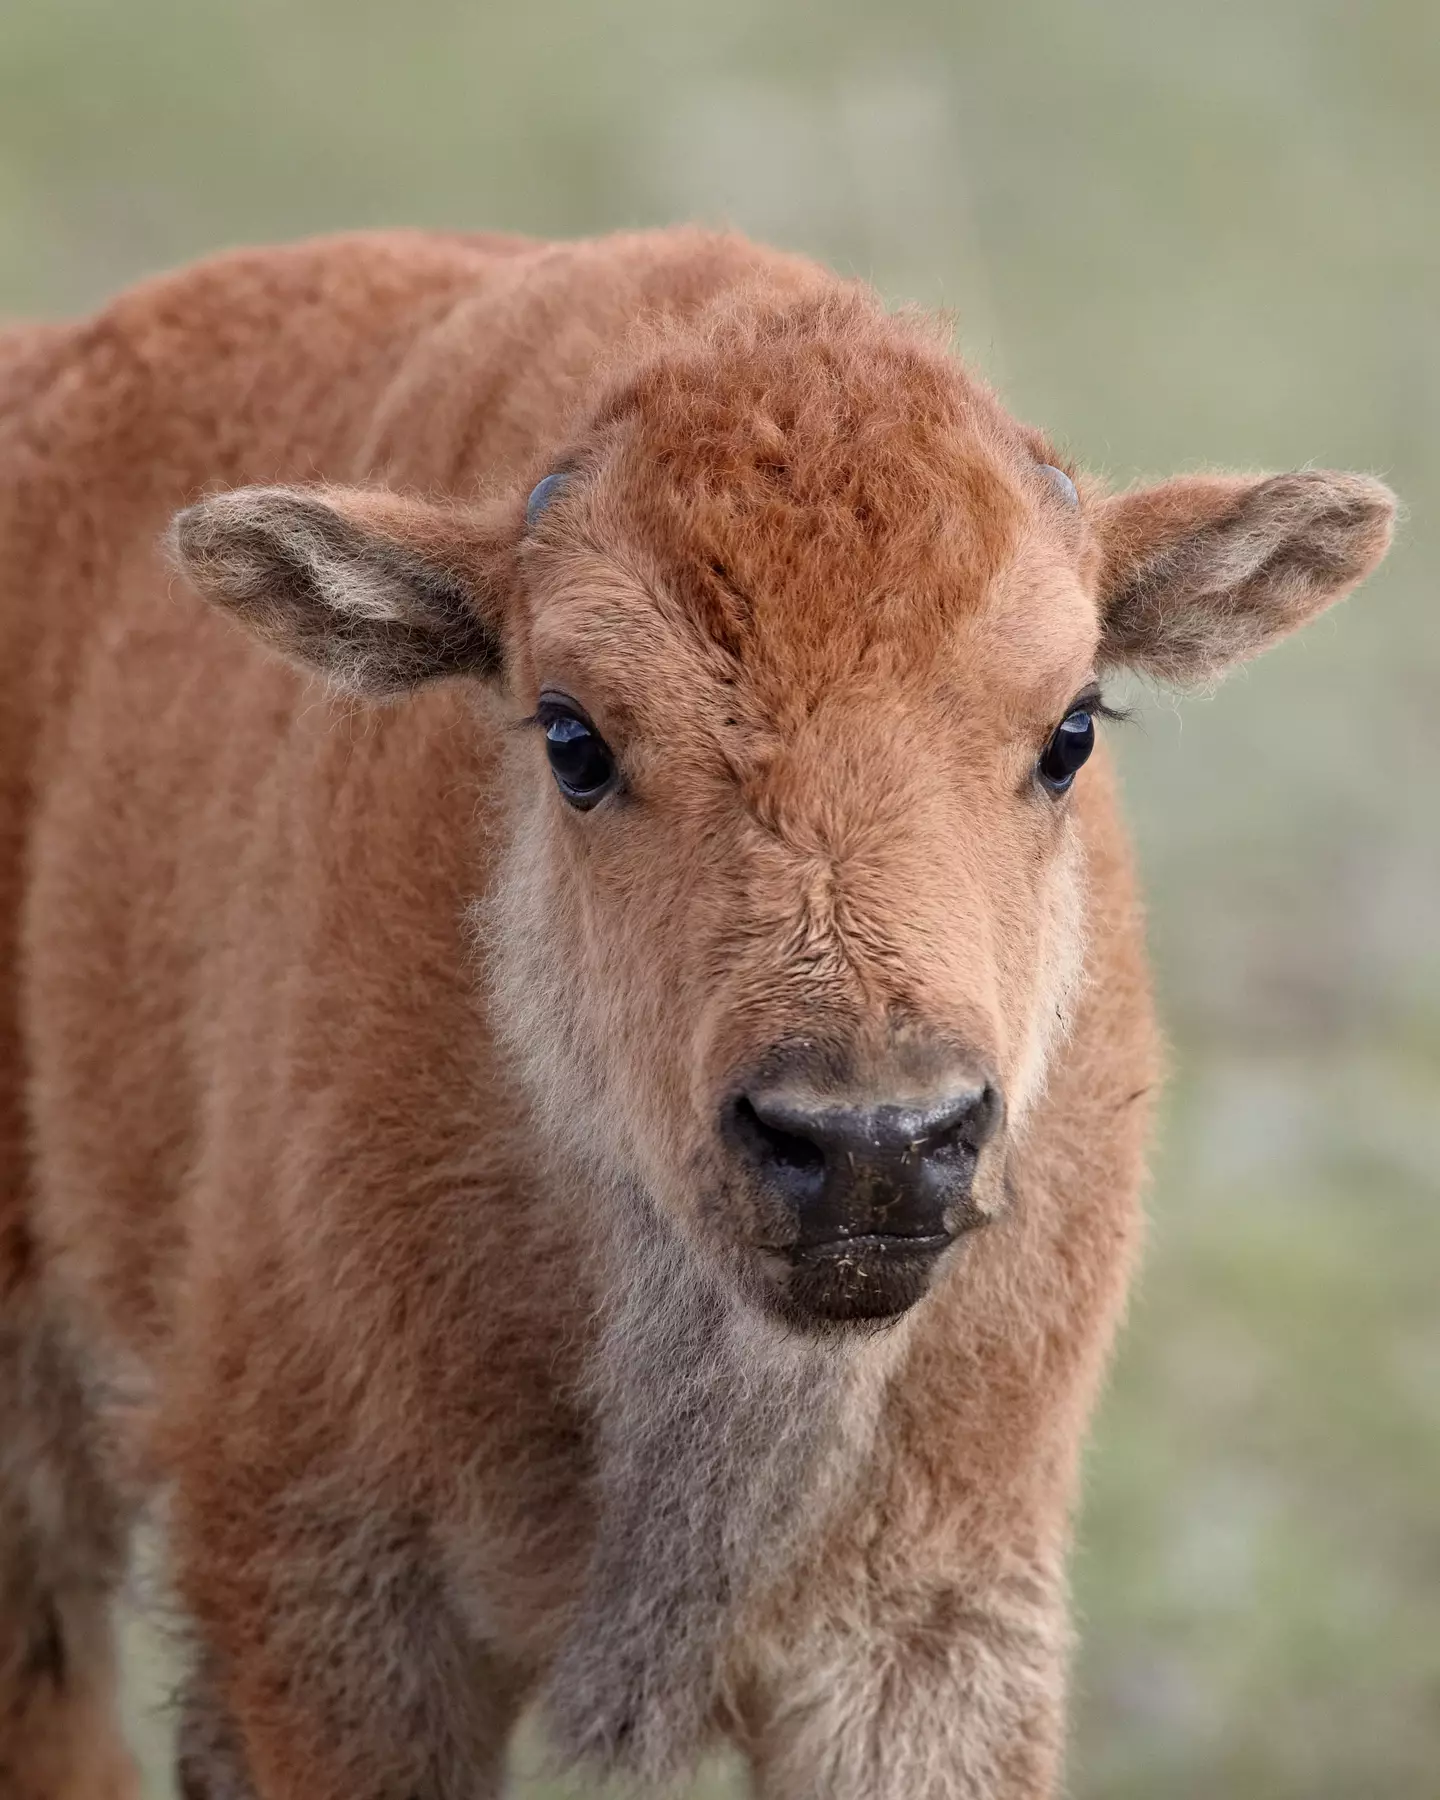 The bison calf - which was similar to the one pictured here - had to be killed.